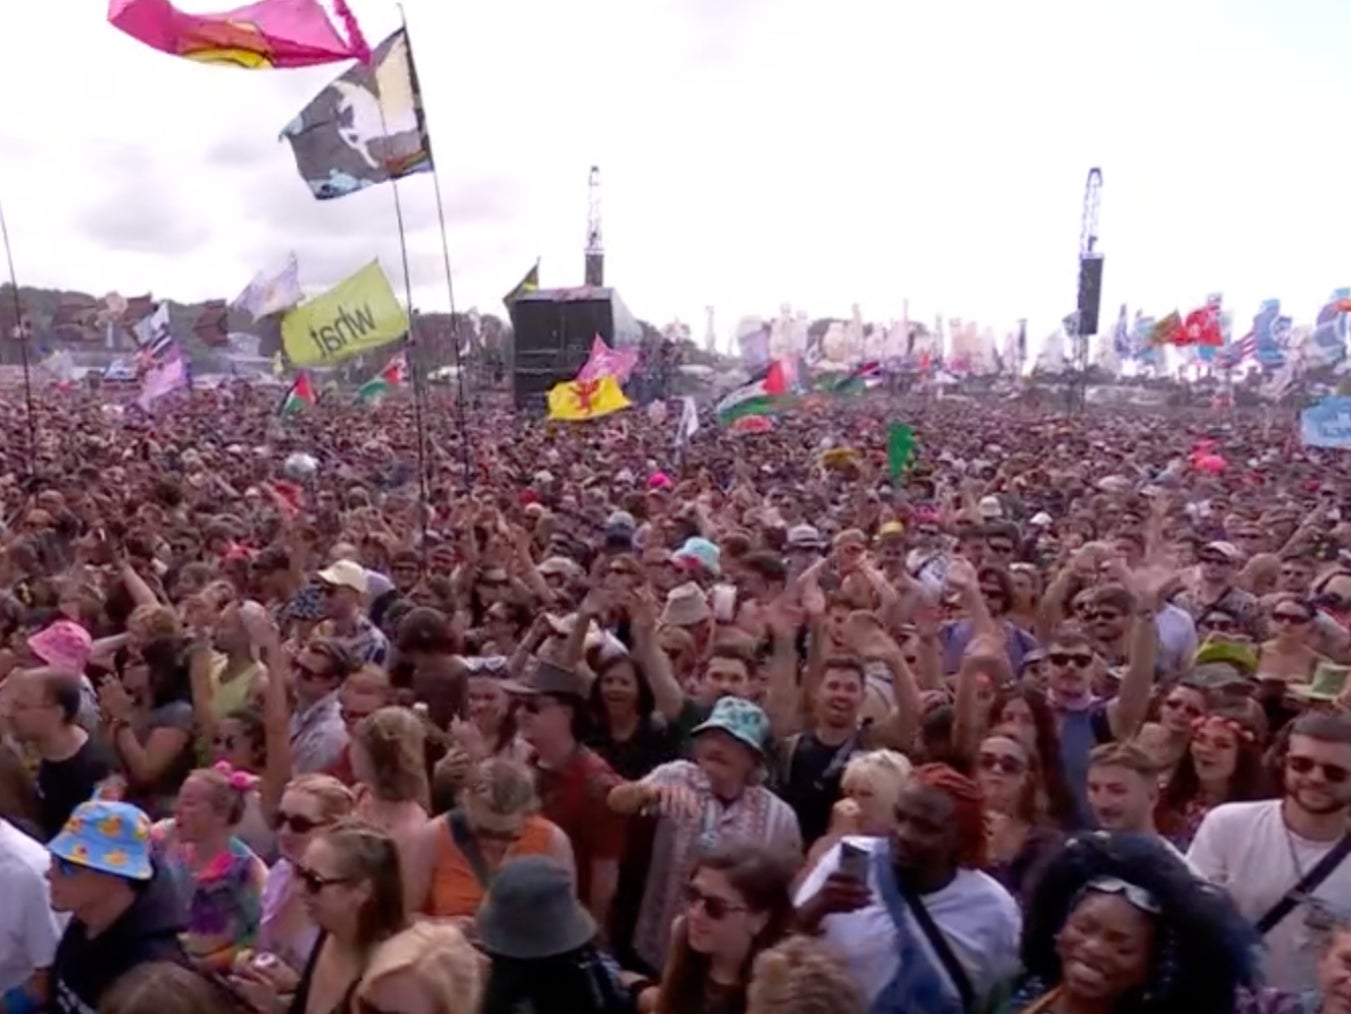 The crowds at Sugababes’ performance on West Holts